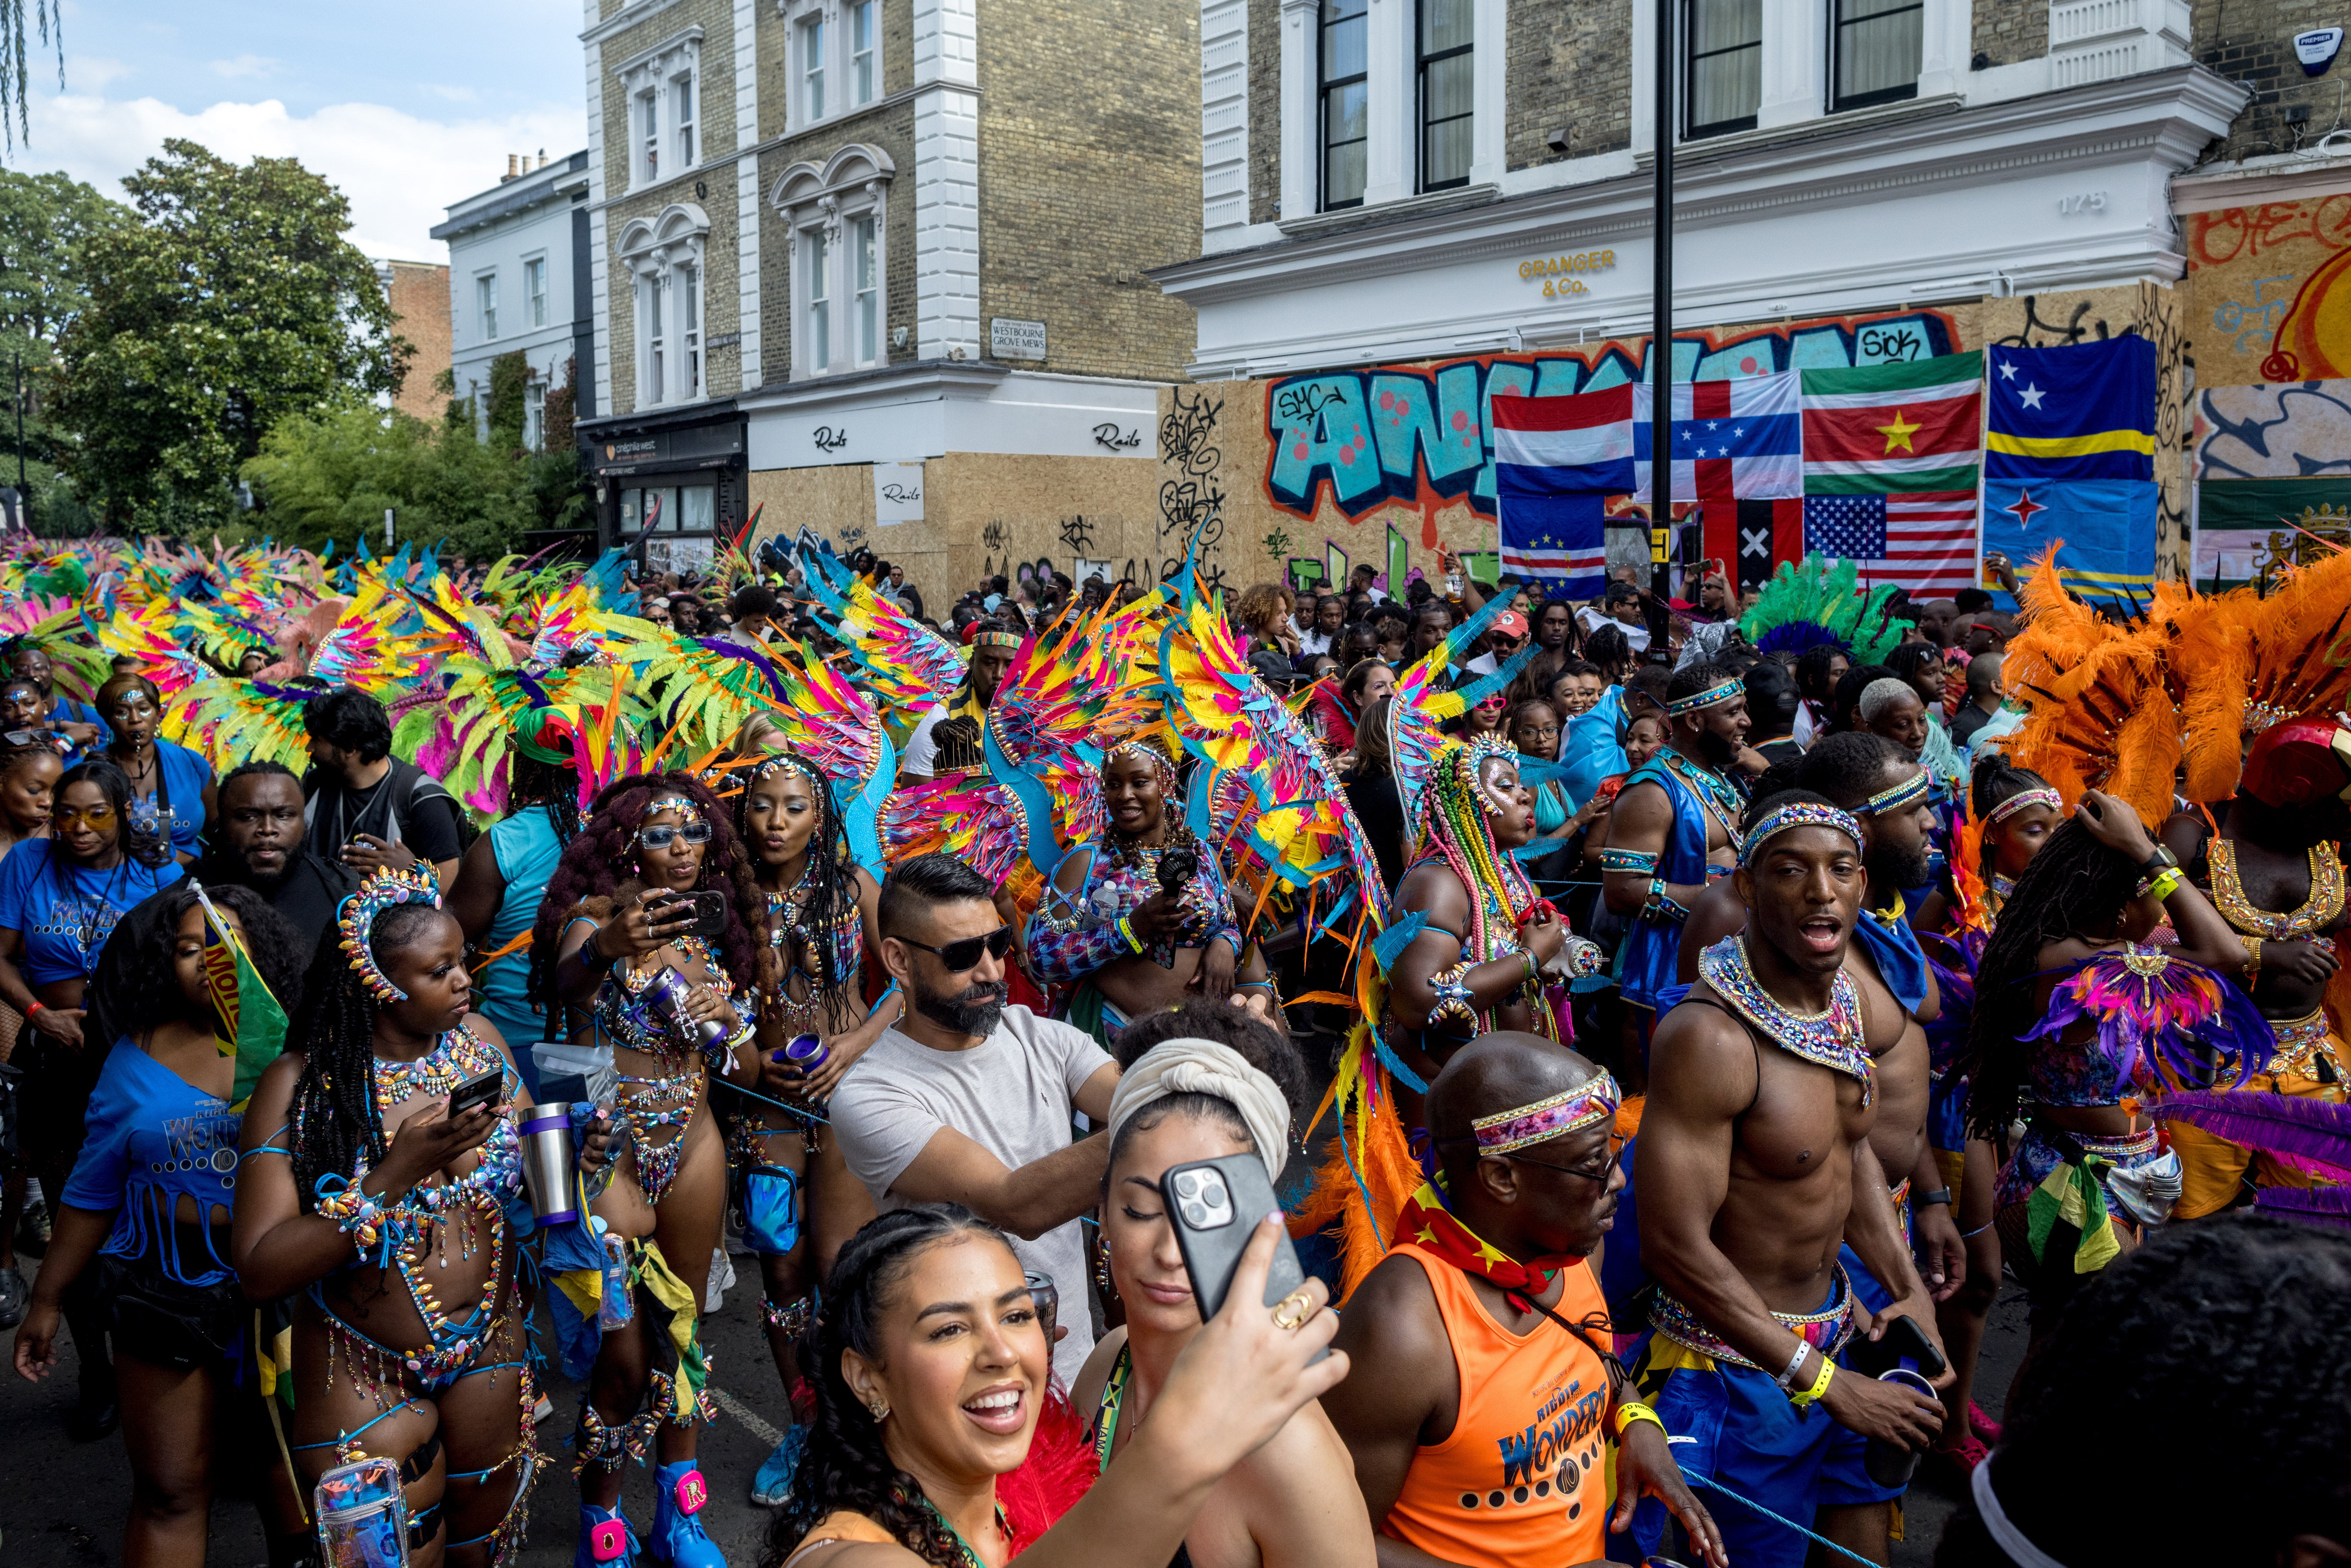 Notting Hill Carnival is a yearly celebration of British African Caribbean and British Indo-Caribbean culture